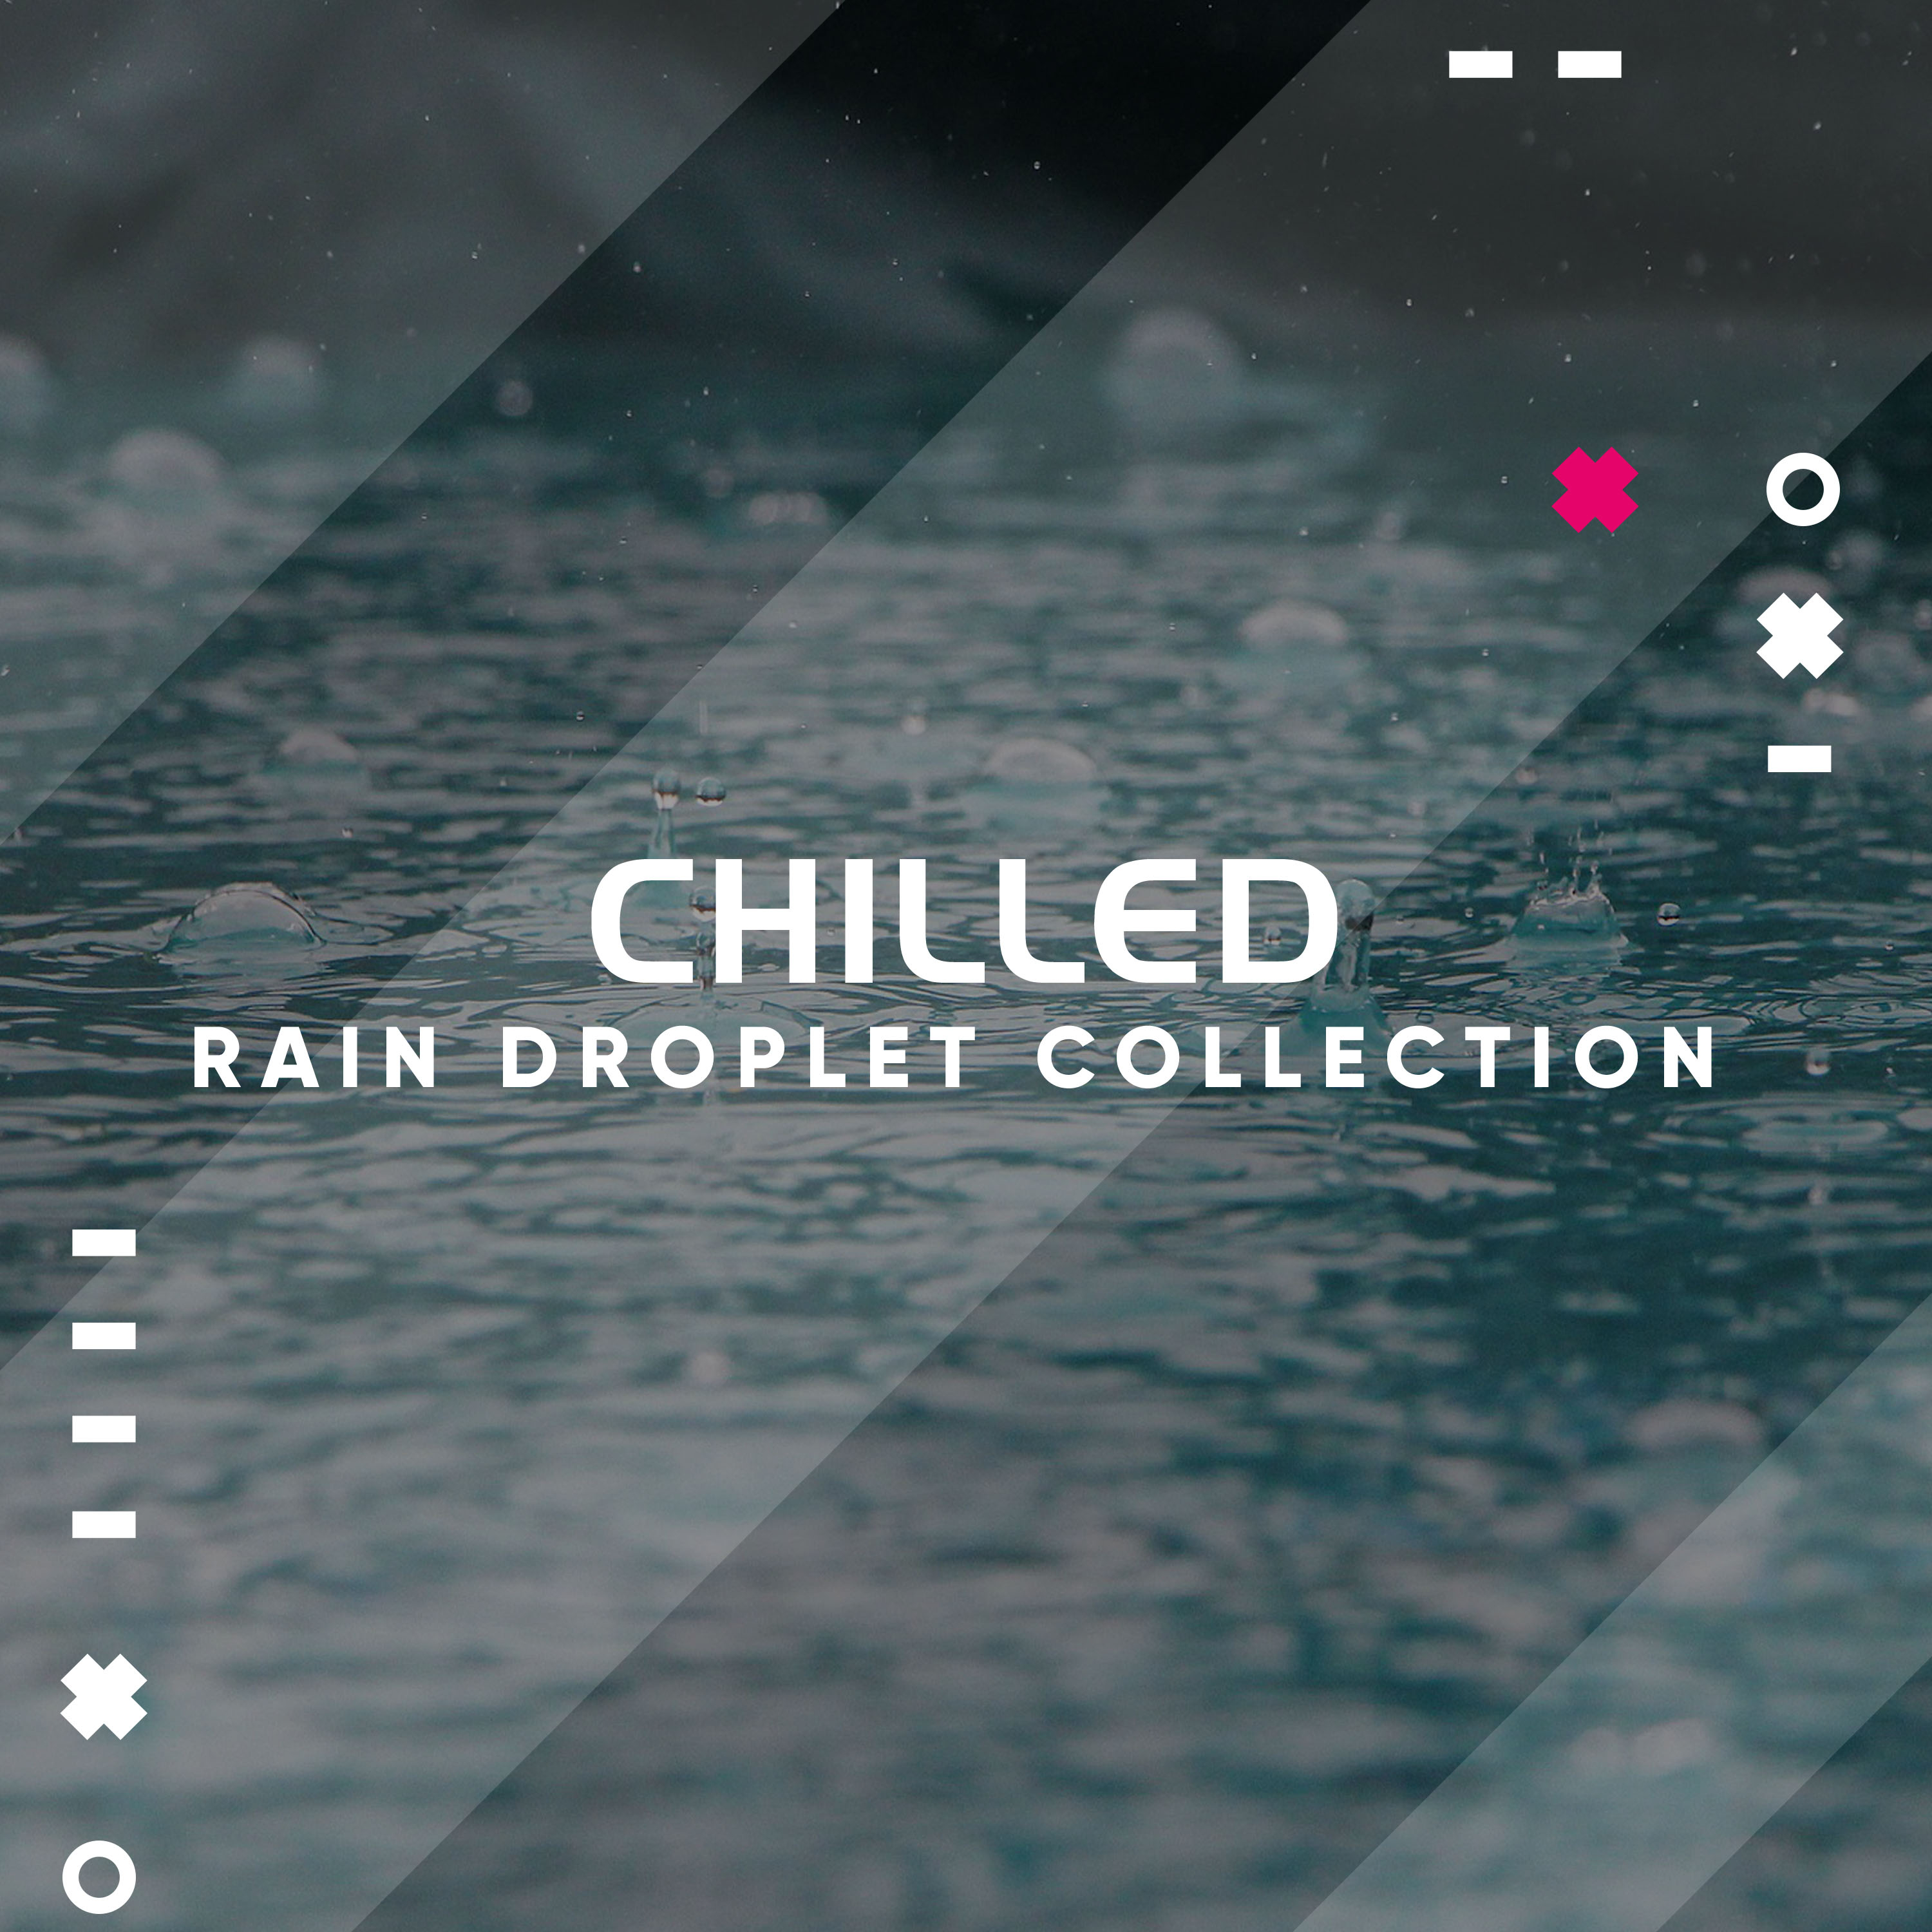 #16 Chilled Rain Droplet Collection